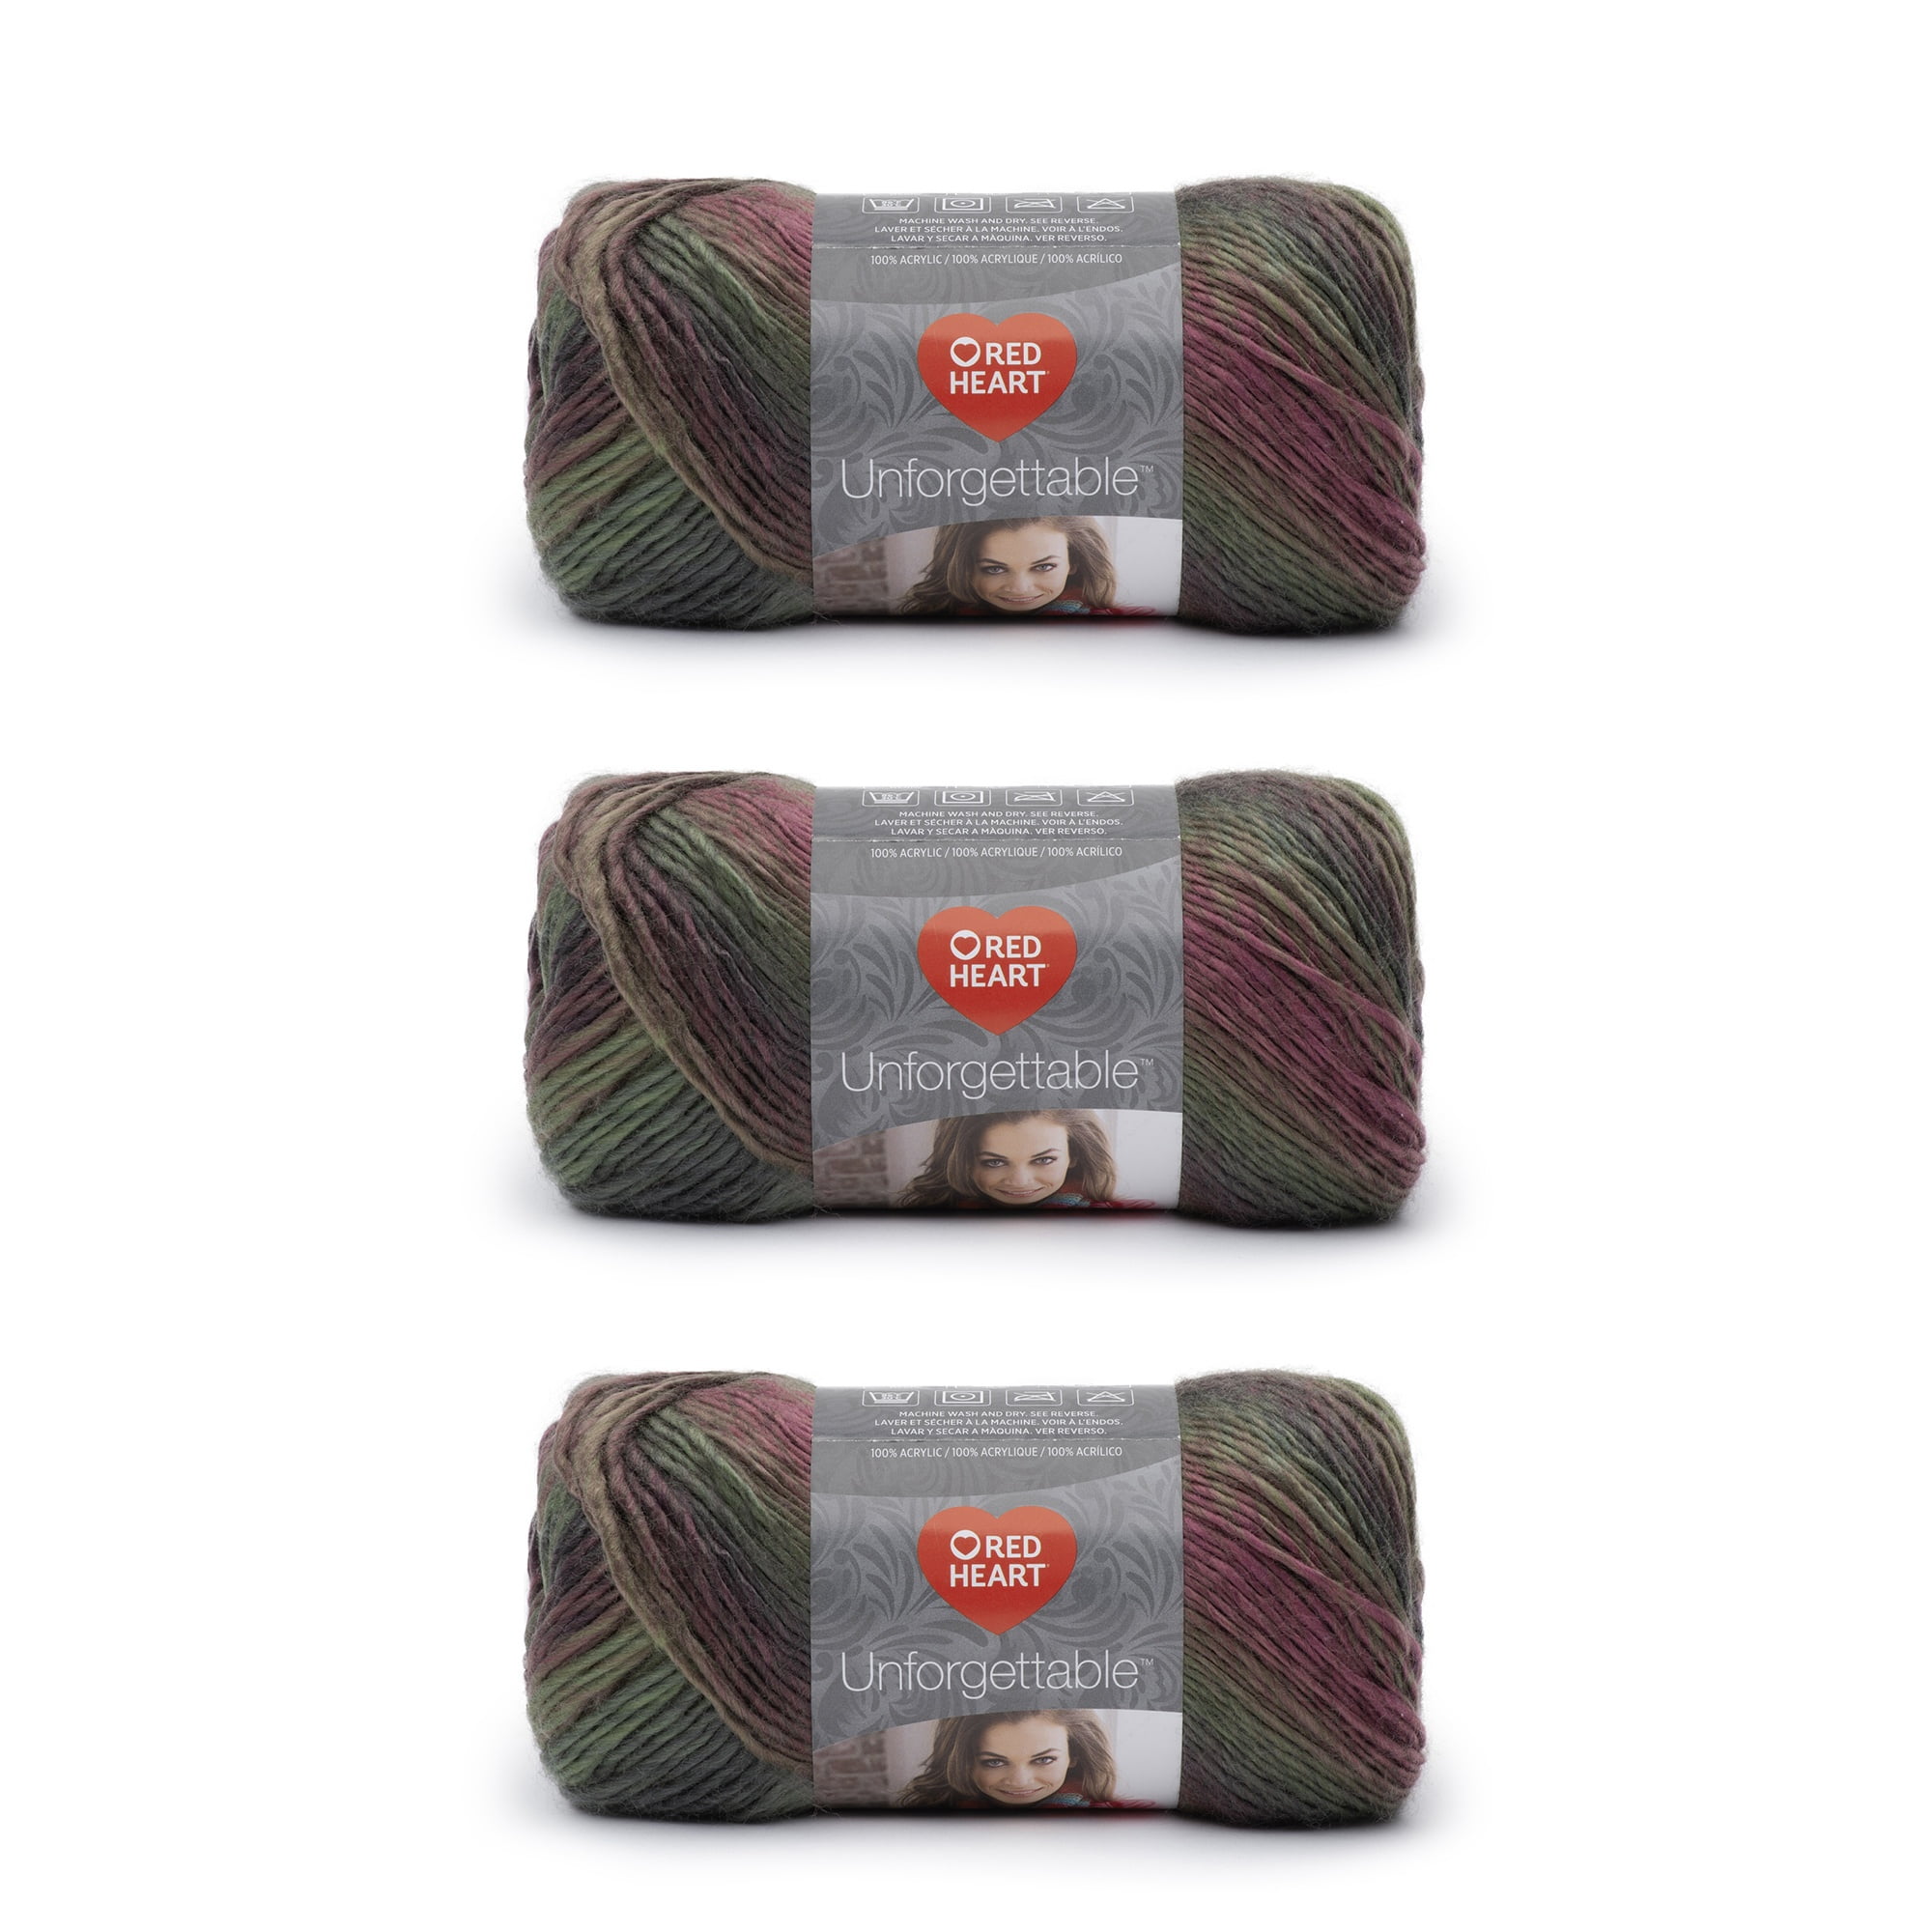 Red Heart Boutique Unforgettable Echo Yarn - 3 Pack of 100g/3.5oz - Acrylic  - 4 Medium (Worsted) - 270 Yards - Knitting/Crochet 